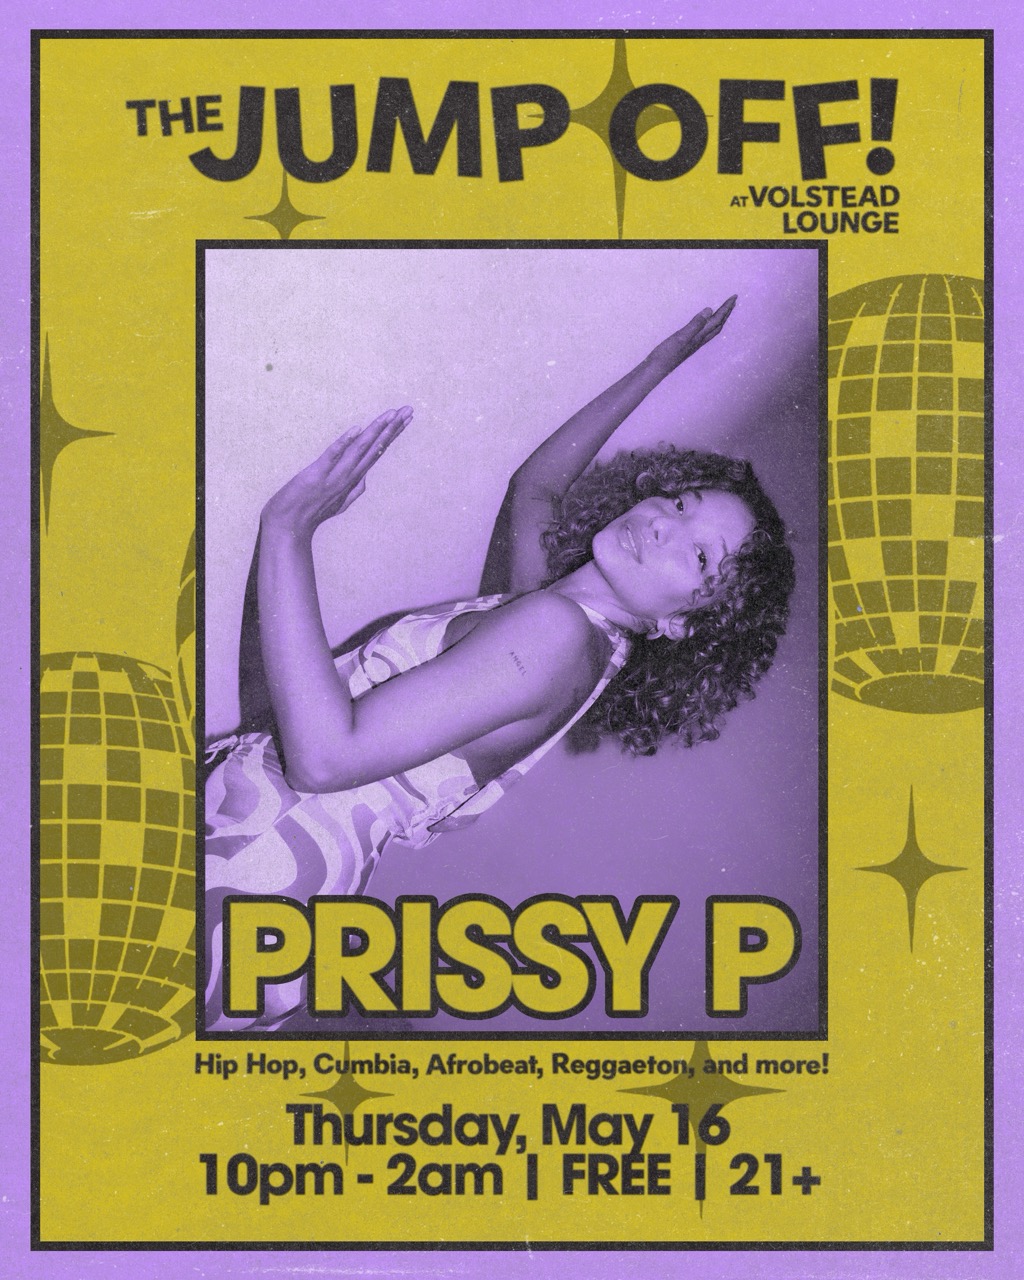 The Jump Off! with Prissy P @ Volstead Lounge